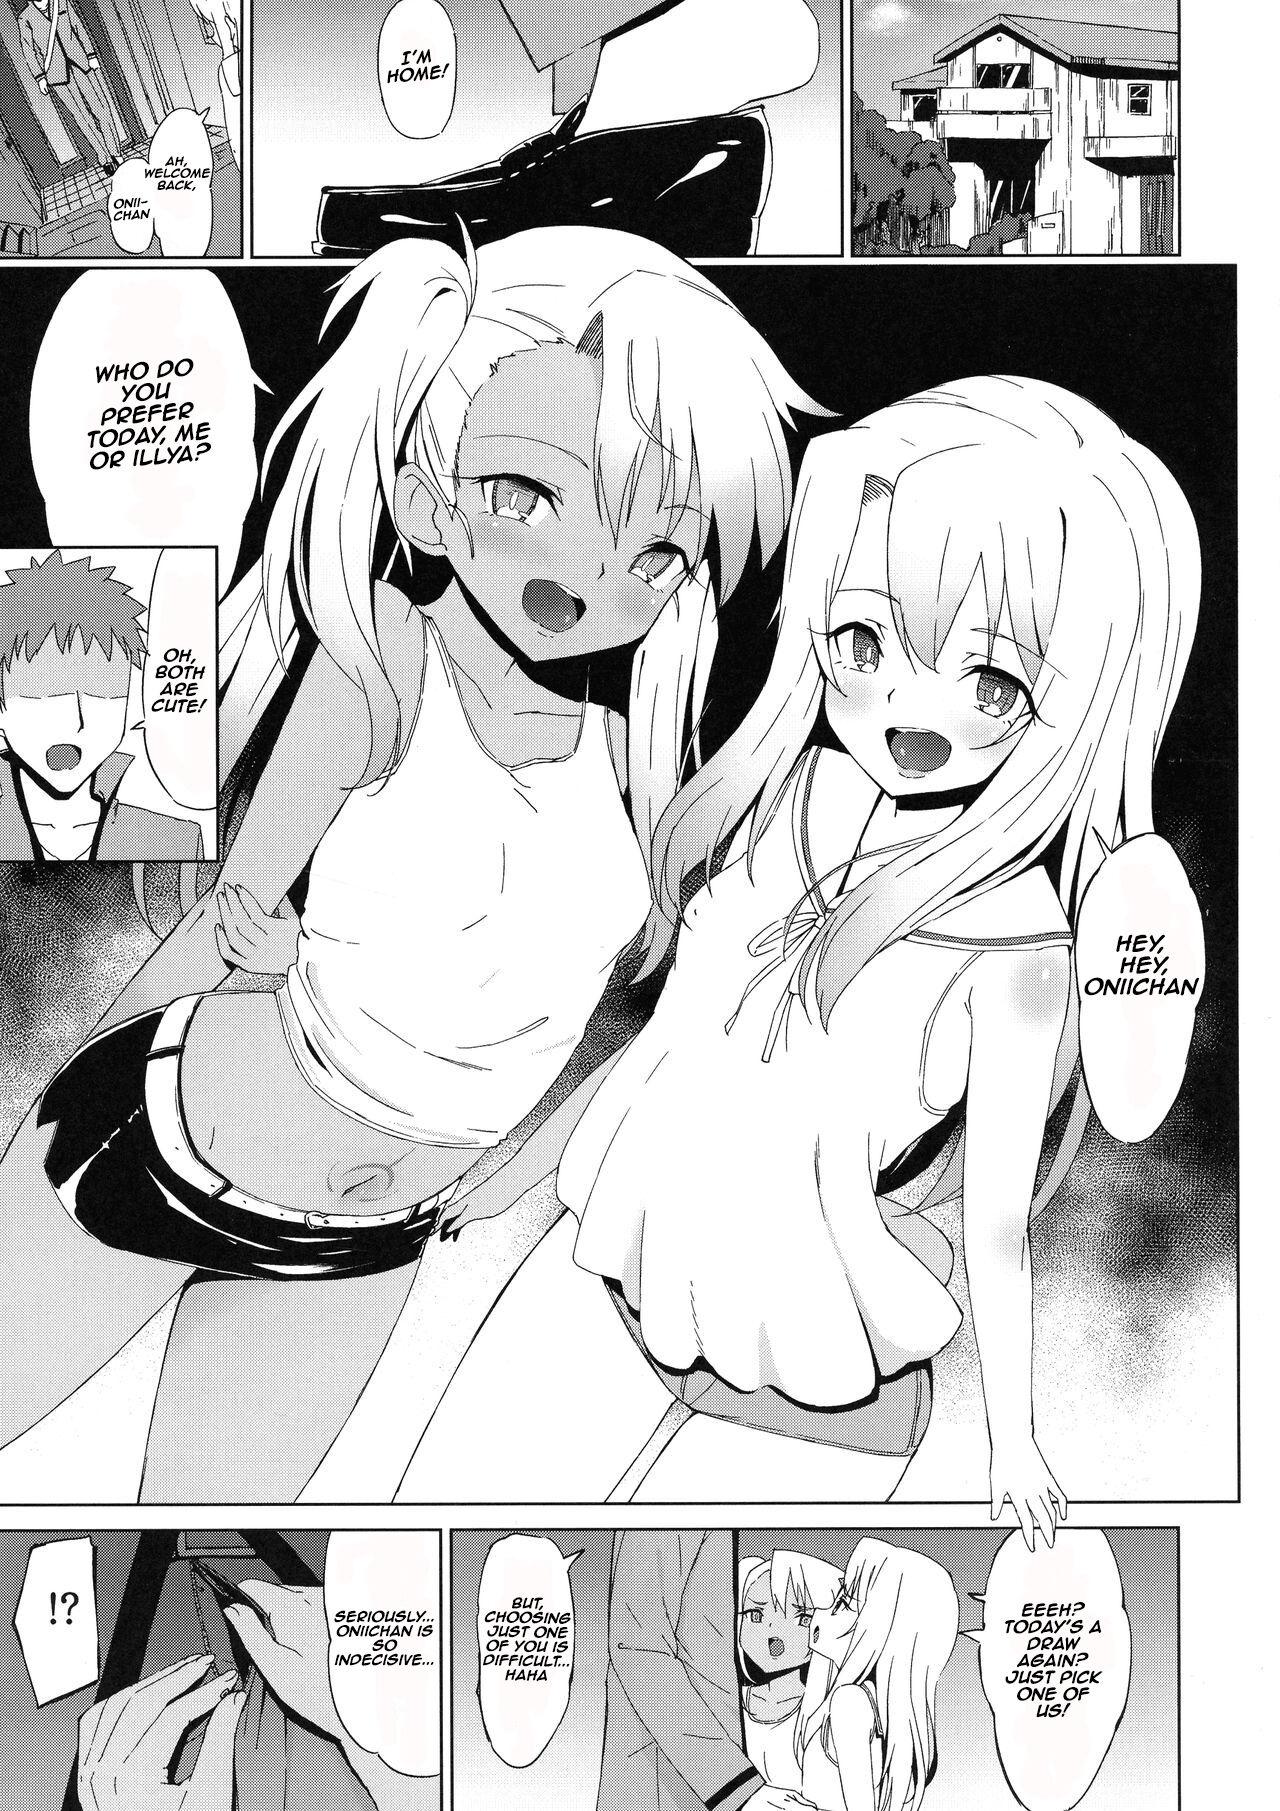 Viet Nam Oshiete Onii-chan - Fate kaleid liner prisma illya Perfect Butt - Page 3